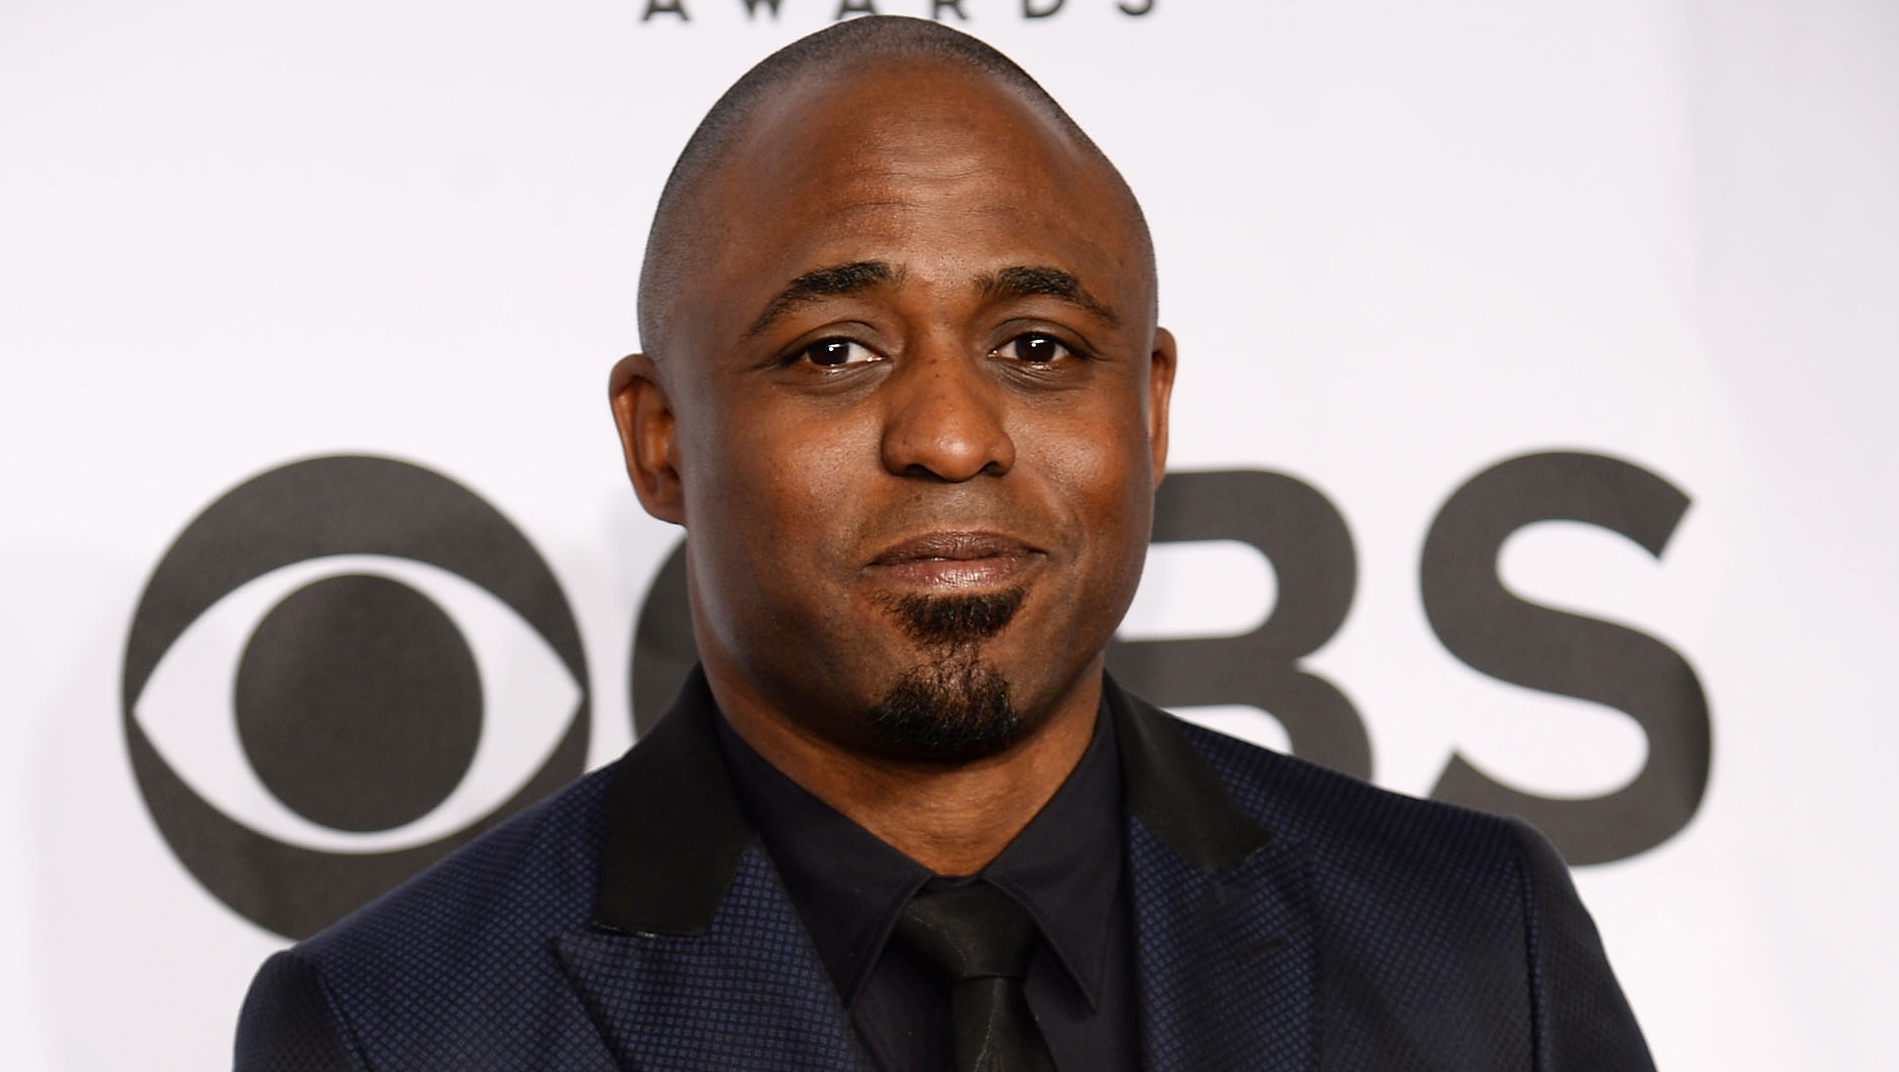 Wayne Brady opens up about his depression "I had a complete breakdown